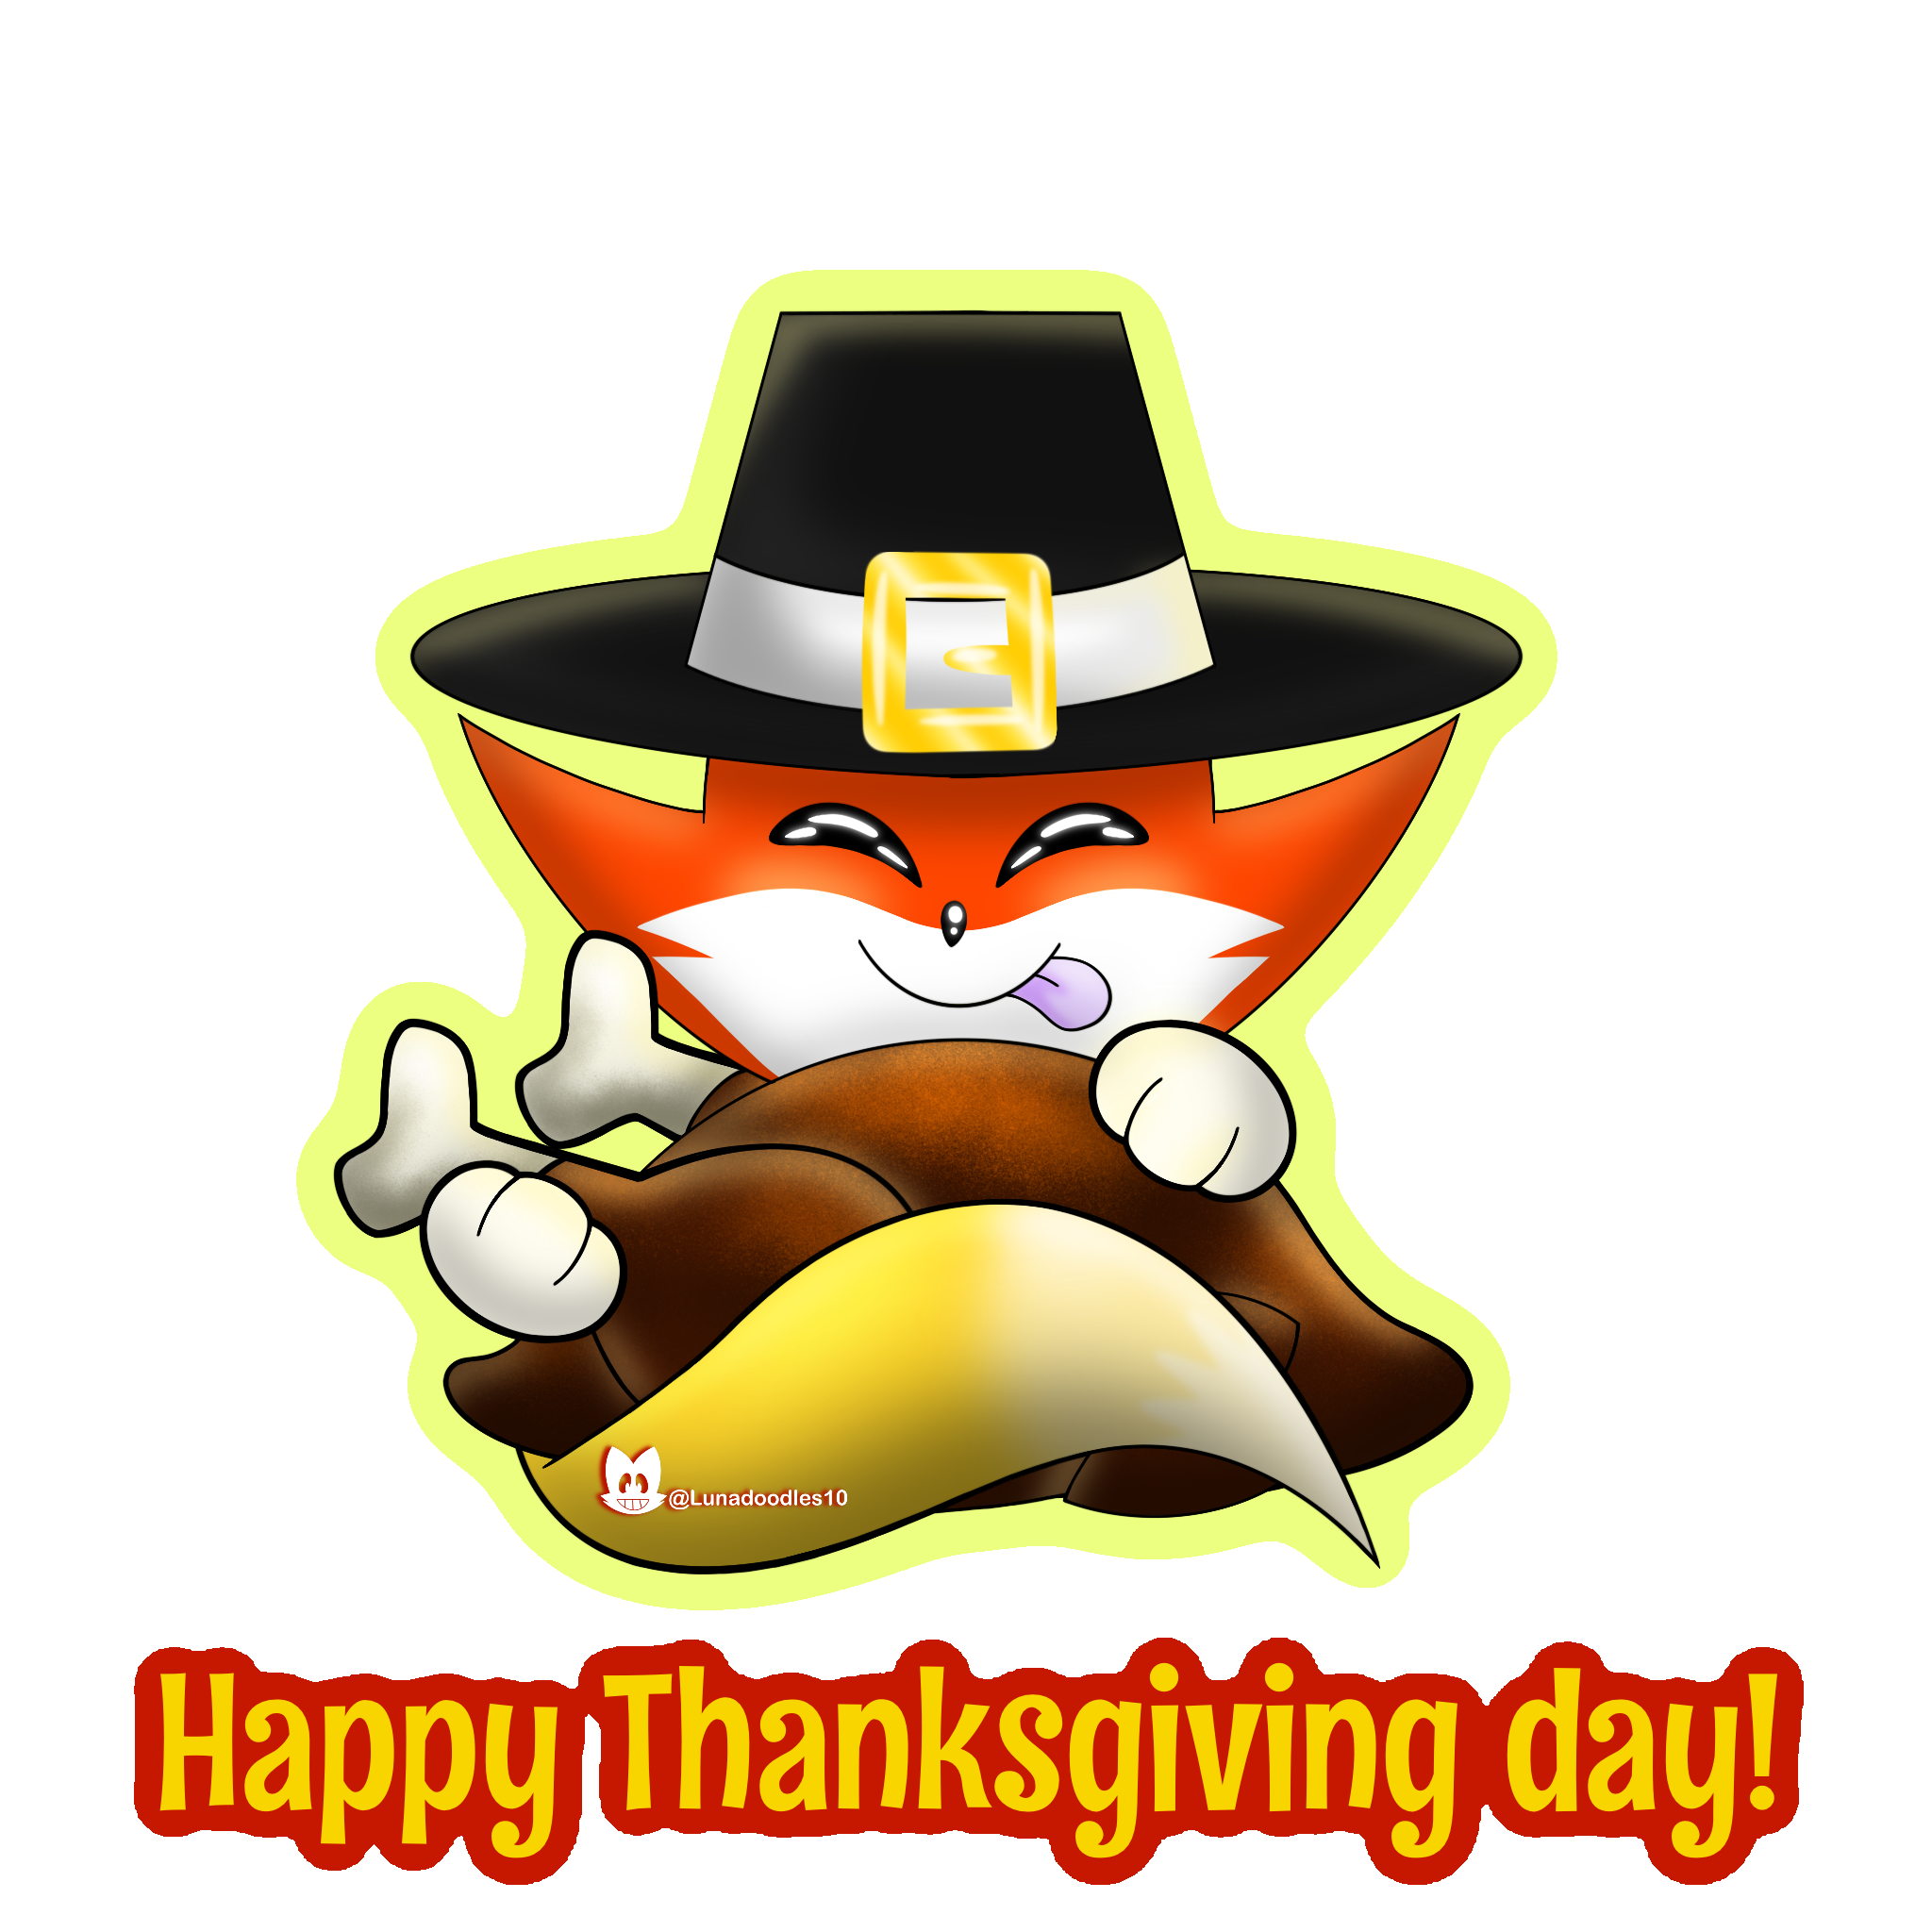 Happy Thanksgiving Day 2023 by Colmodo on DeviantArt